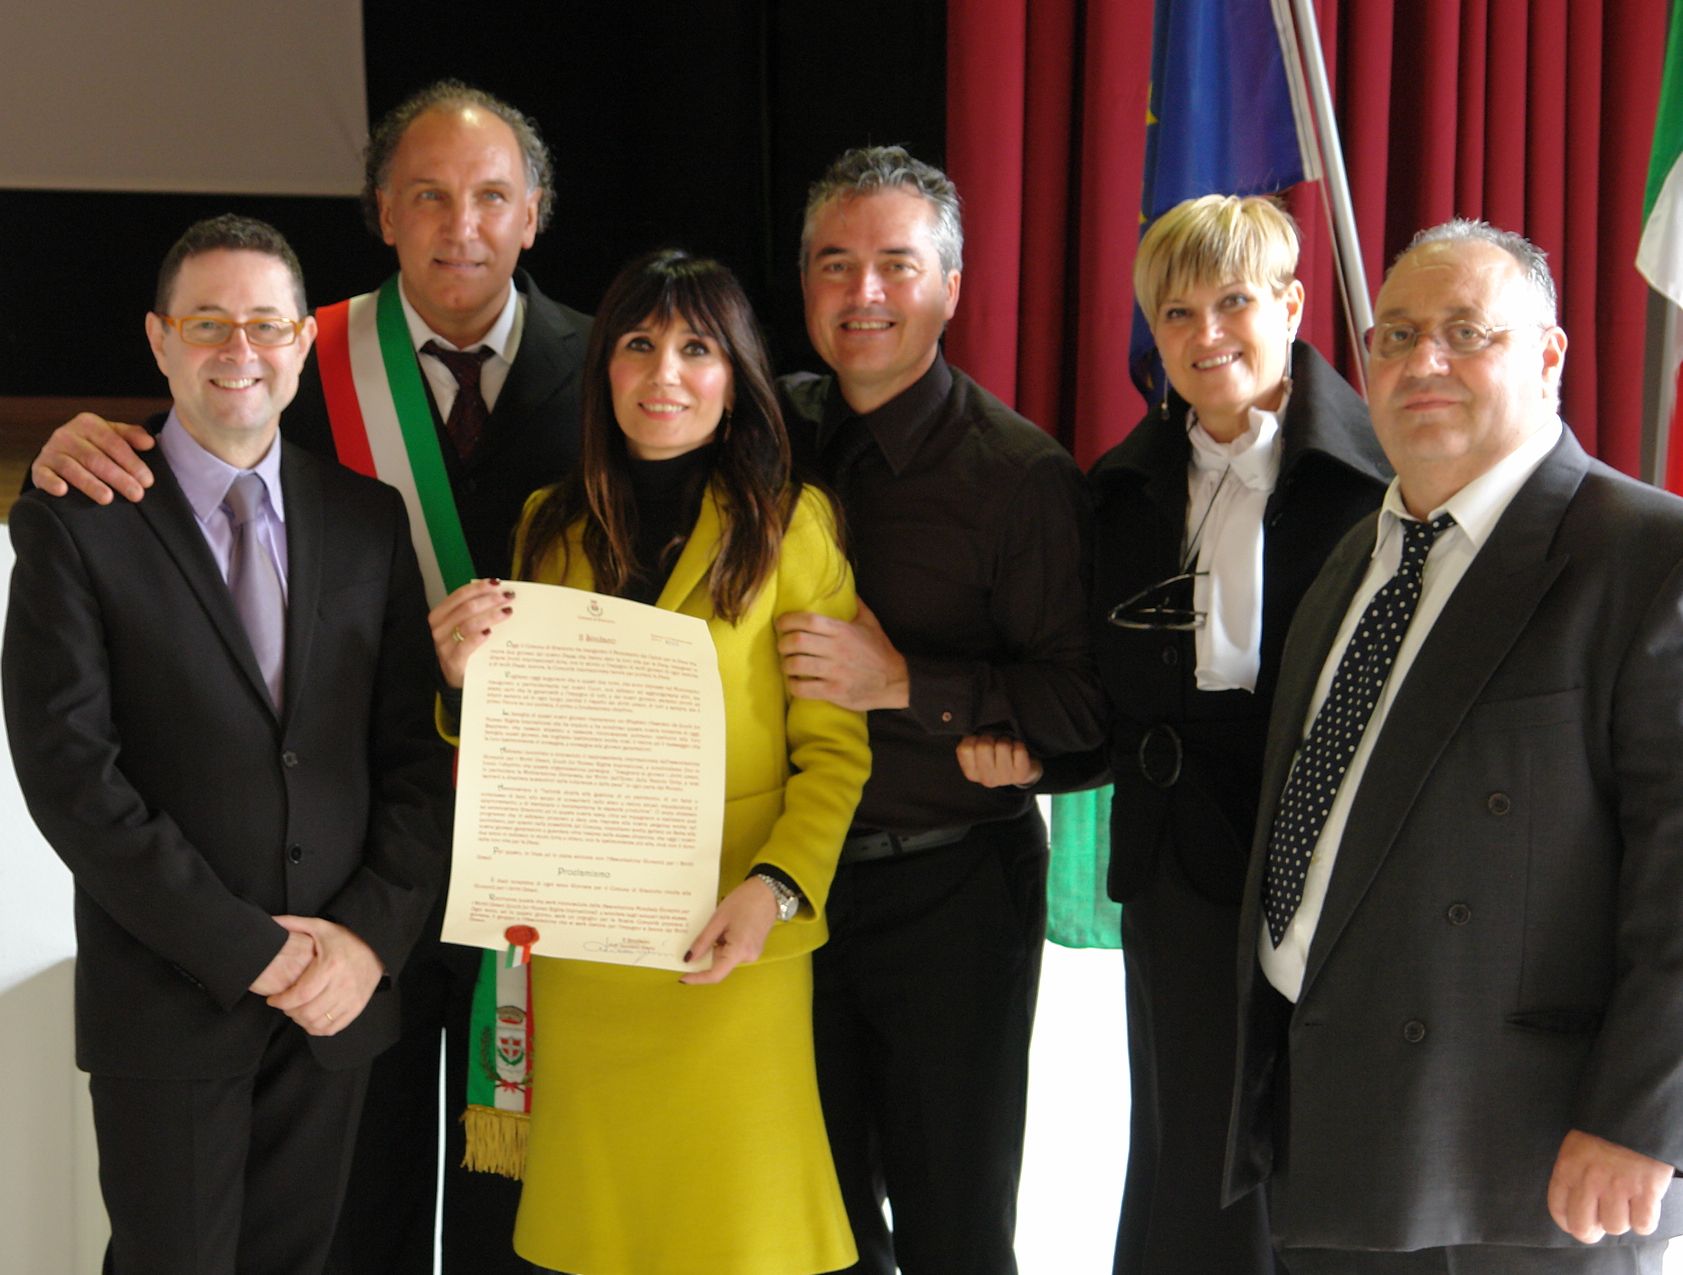 Members of the Church of Scientology of Padova and city officials of Grantorto, Italy, with the proclamation declaring November 10 as Youth for Human Rights Day.